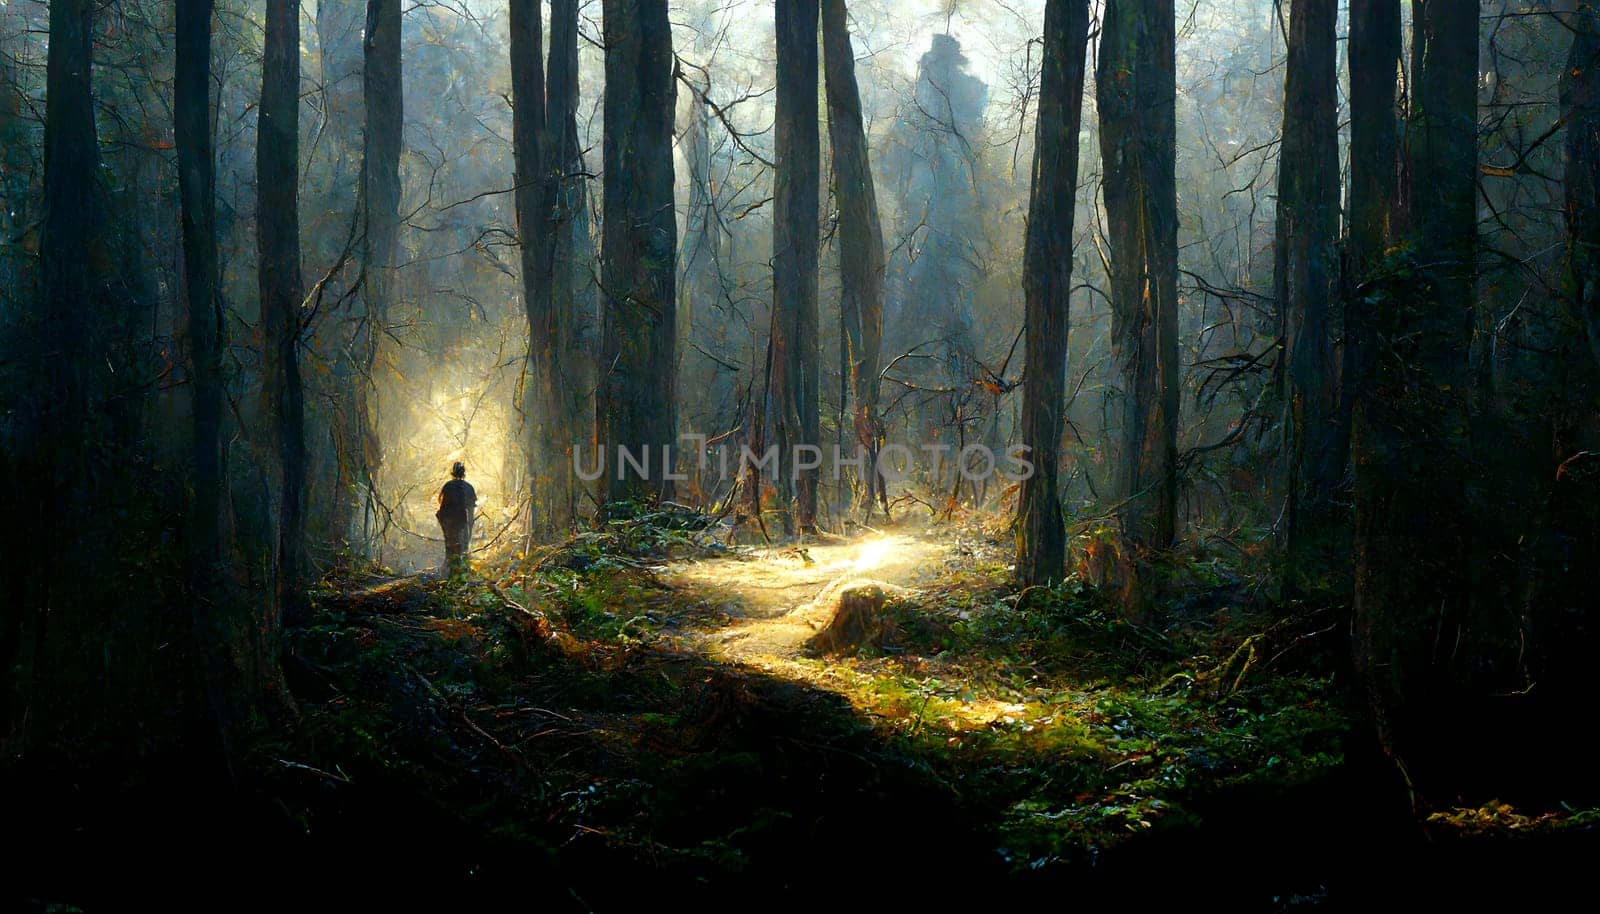 human figure silhouette in forest backlit mist, neural network generated art. Digitally generated image. Not based on any actual scene or pattern.